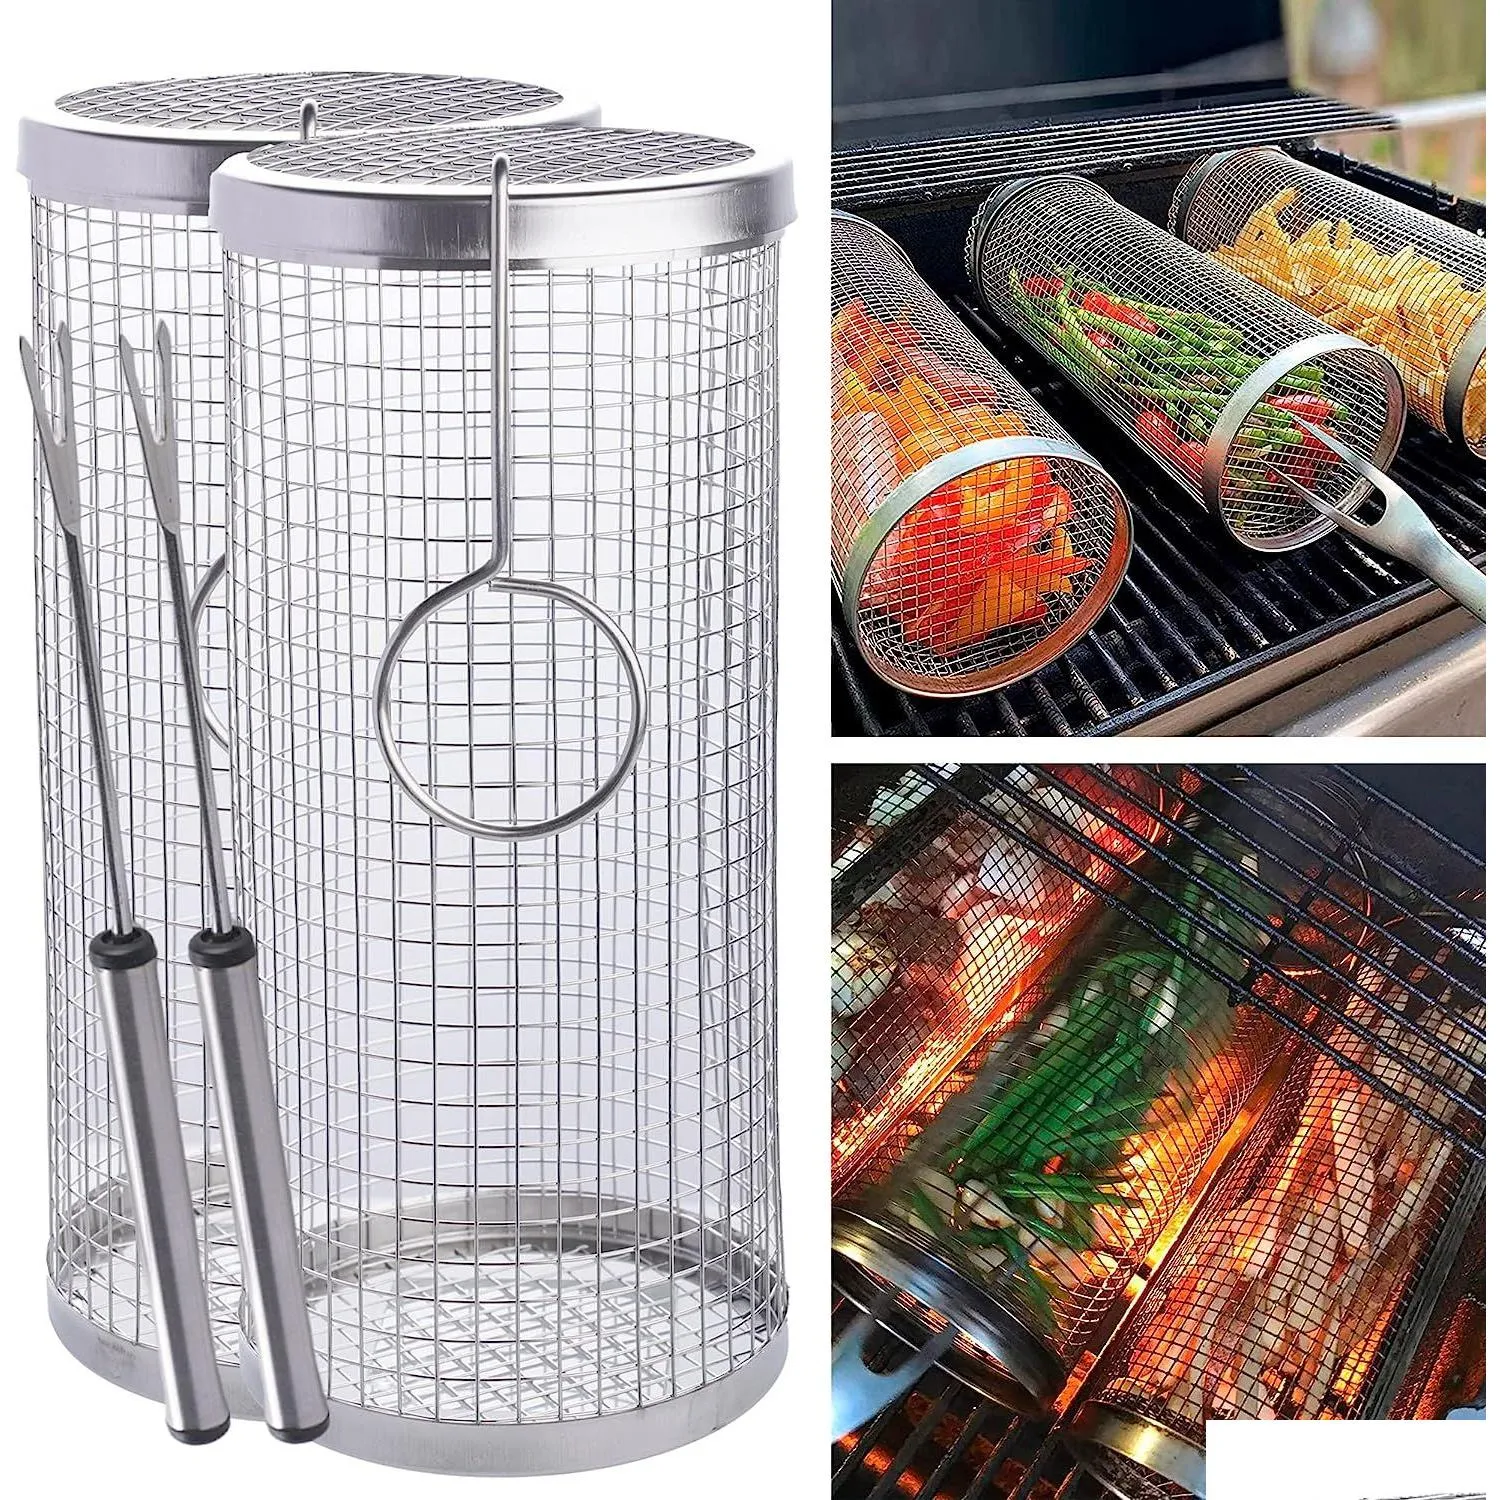 Bbq Tools Accessories The Stainless Steel Barbecue Cooking Basket Is Suitable For Outdoor Grill Round Bonfire Cam Picnic Drop Deli Dhfsy